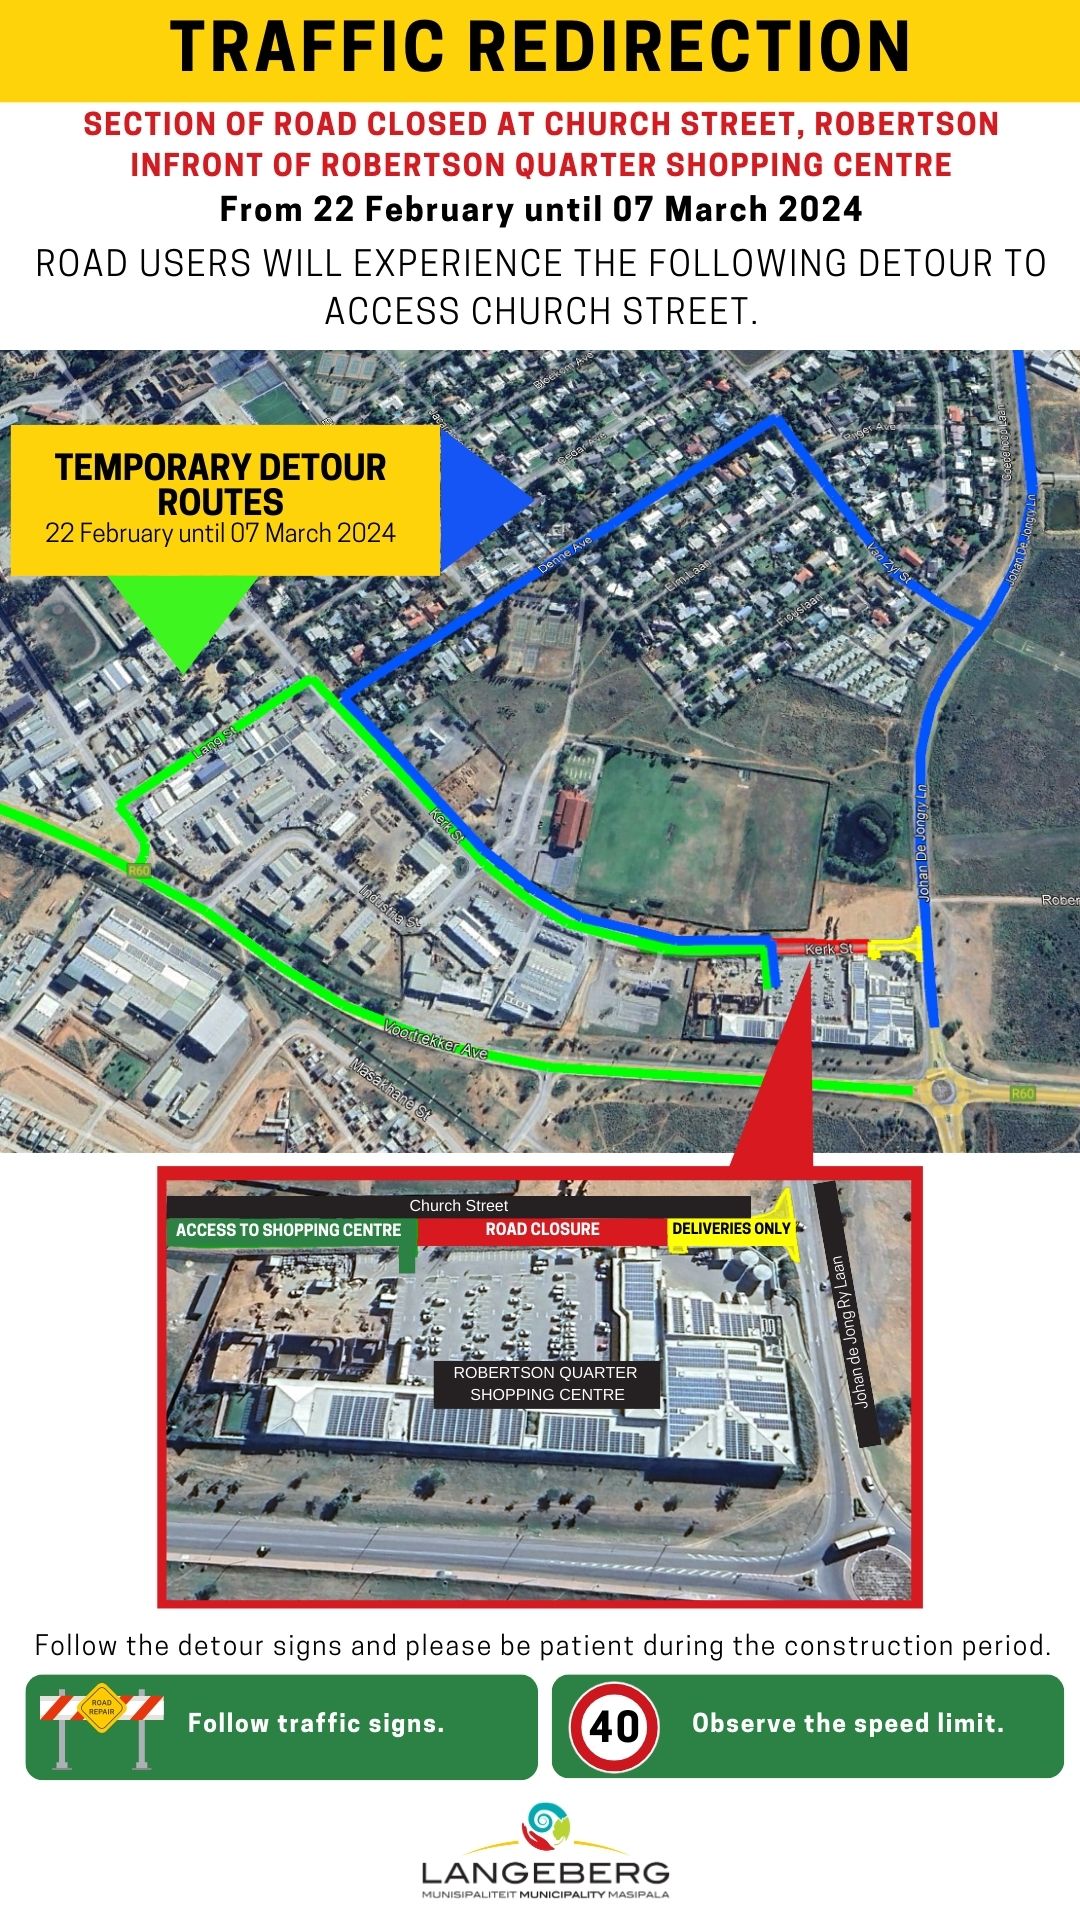 TRAFFIC REDIRECTION PLANNED ON R317 ROBERTSON Road users will experience a detour on the R317 road after the Robertson roundabout to Bonnievale for the construction of a second entrance into Nk 2